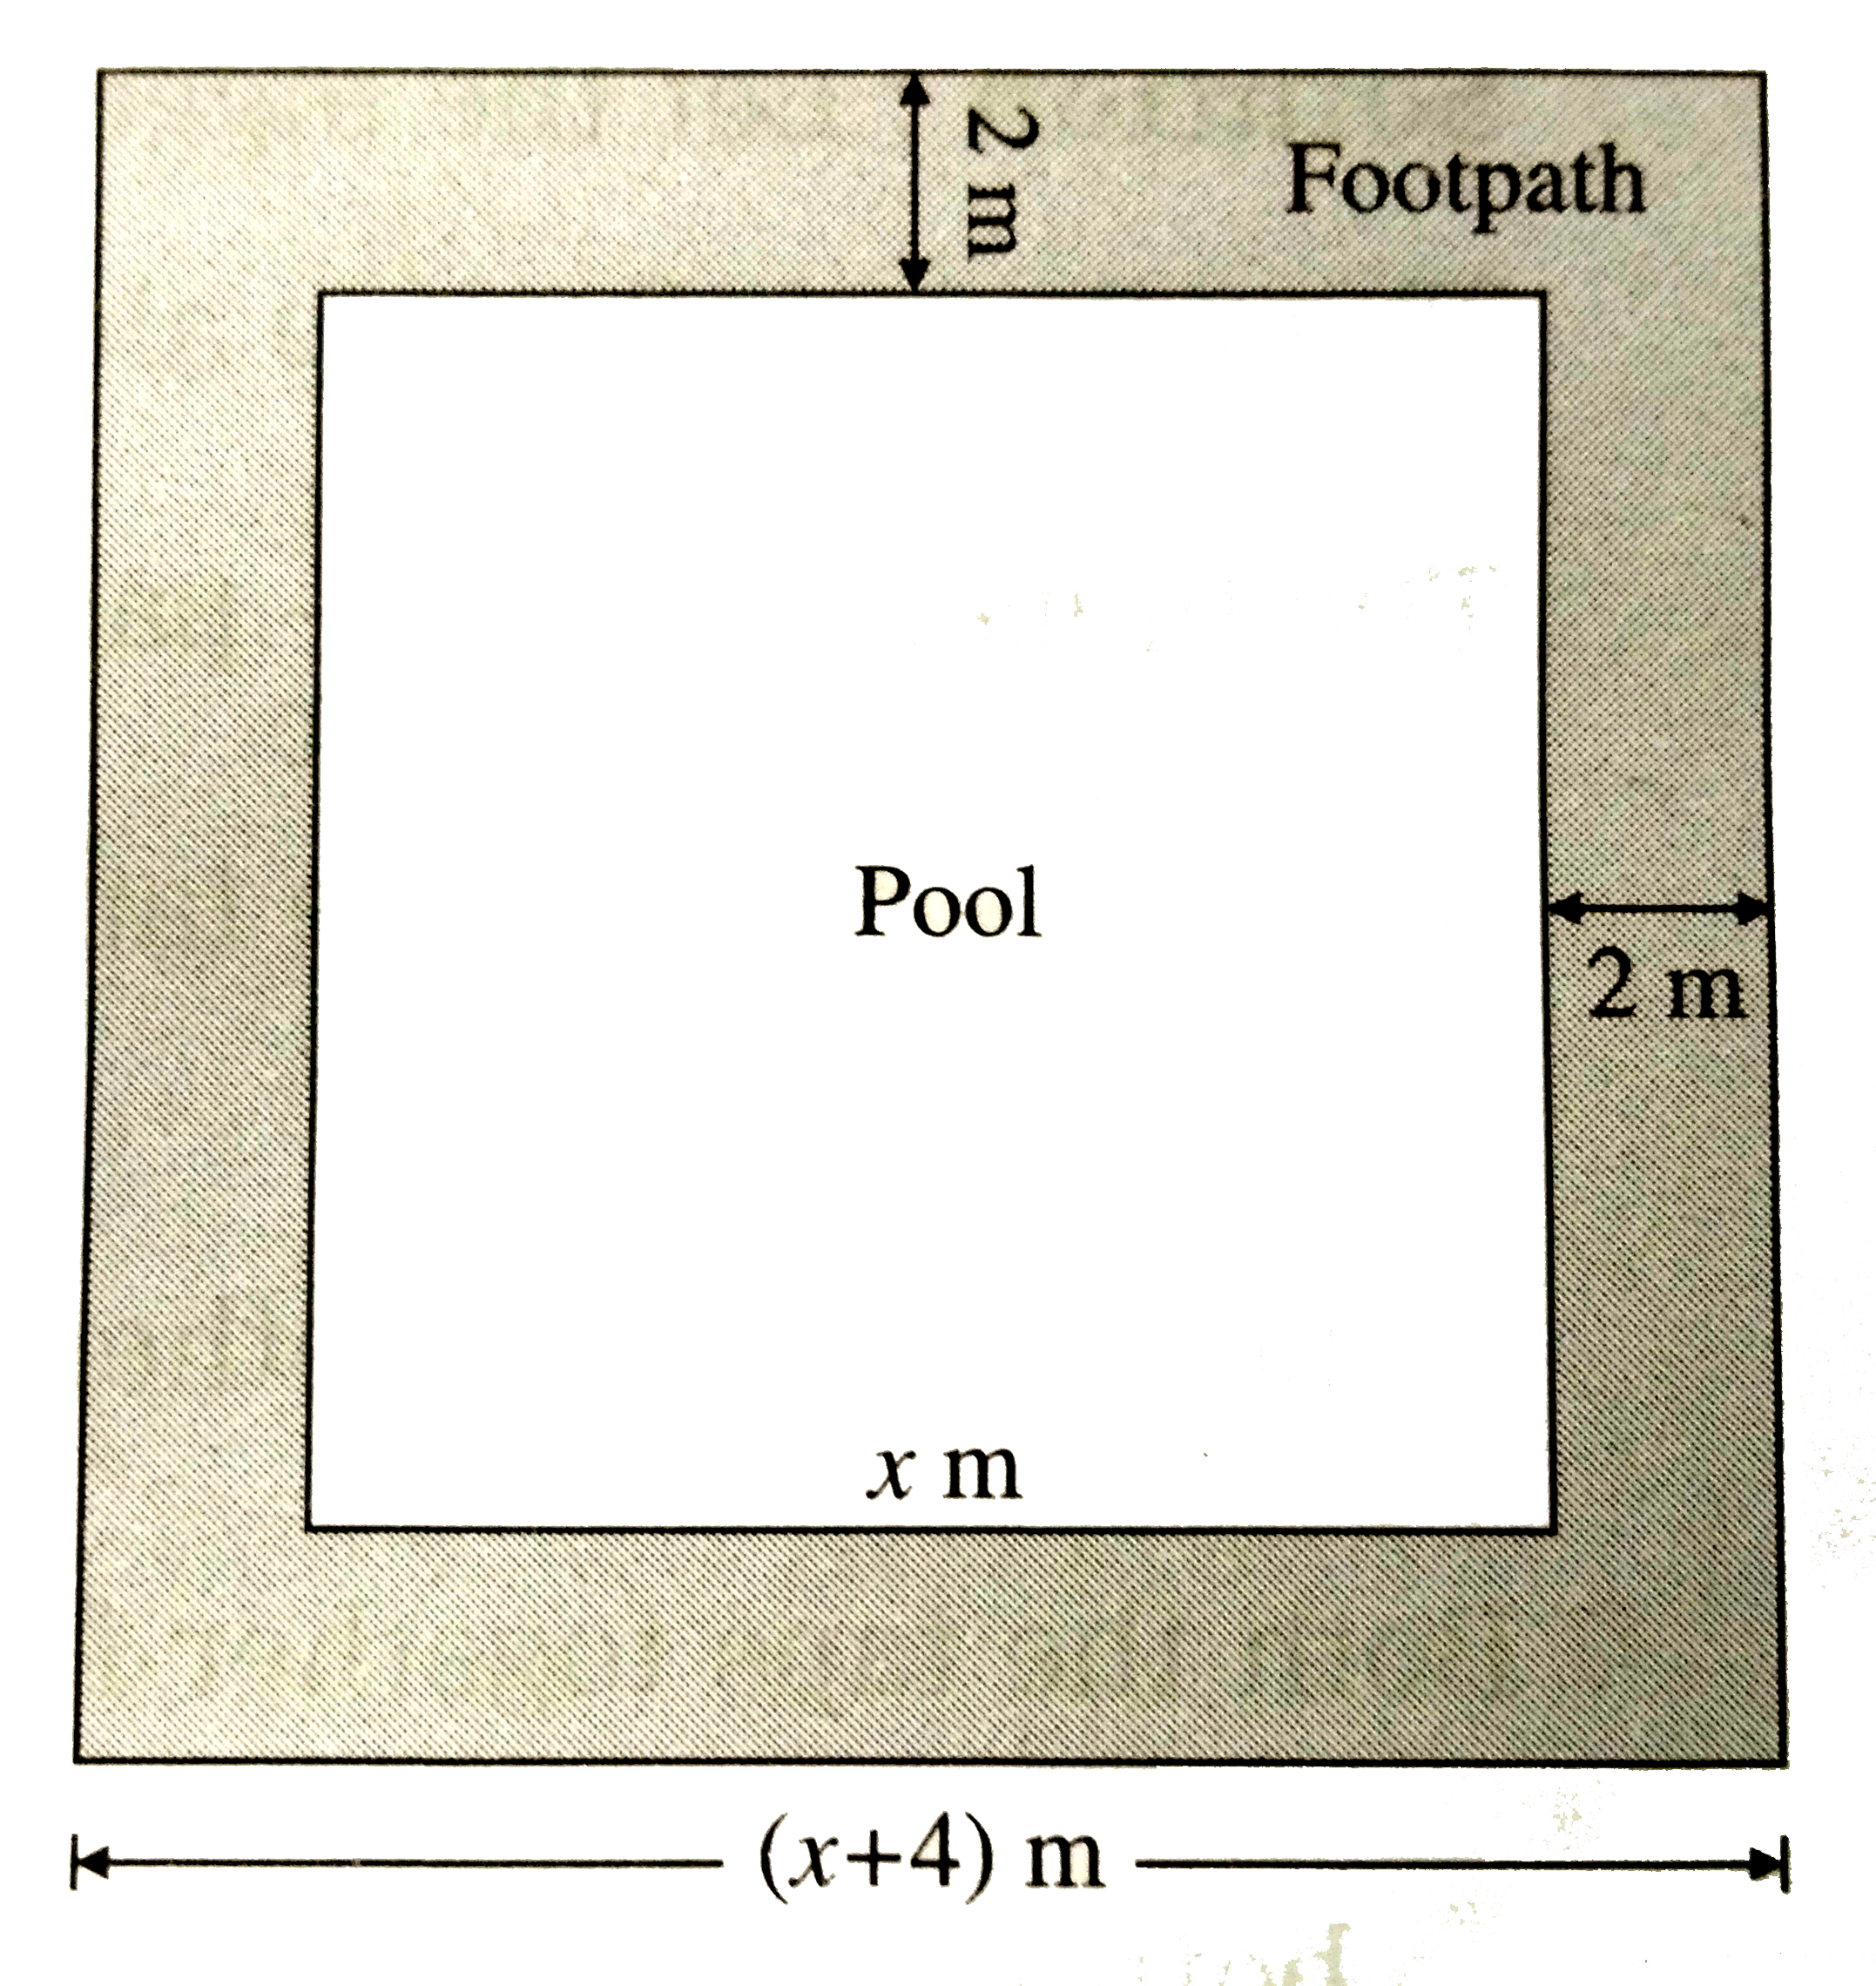 Around a square pool,  there is a footpath of width 2m. If the area of the foothpath is 5/4 times that of the pool, find the area of the pool.